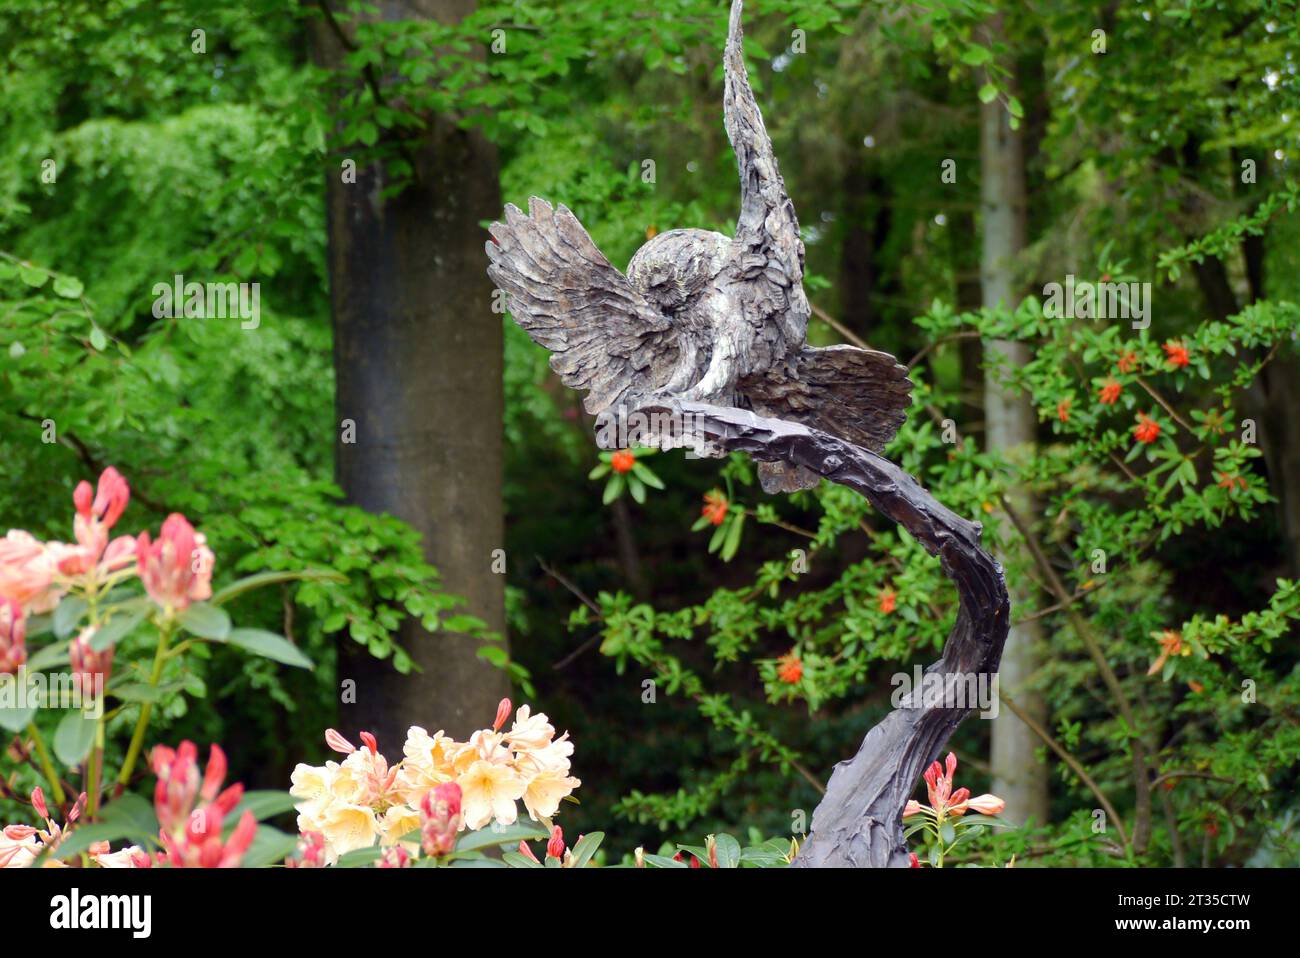 Bronze Sculpture of a Tawny Owl Flying on a Branch by Artist Hamish Mackie in the Himalayan Garden & Sculpture Park, North Yorkshire, England. Stock Photo